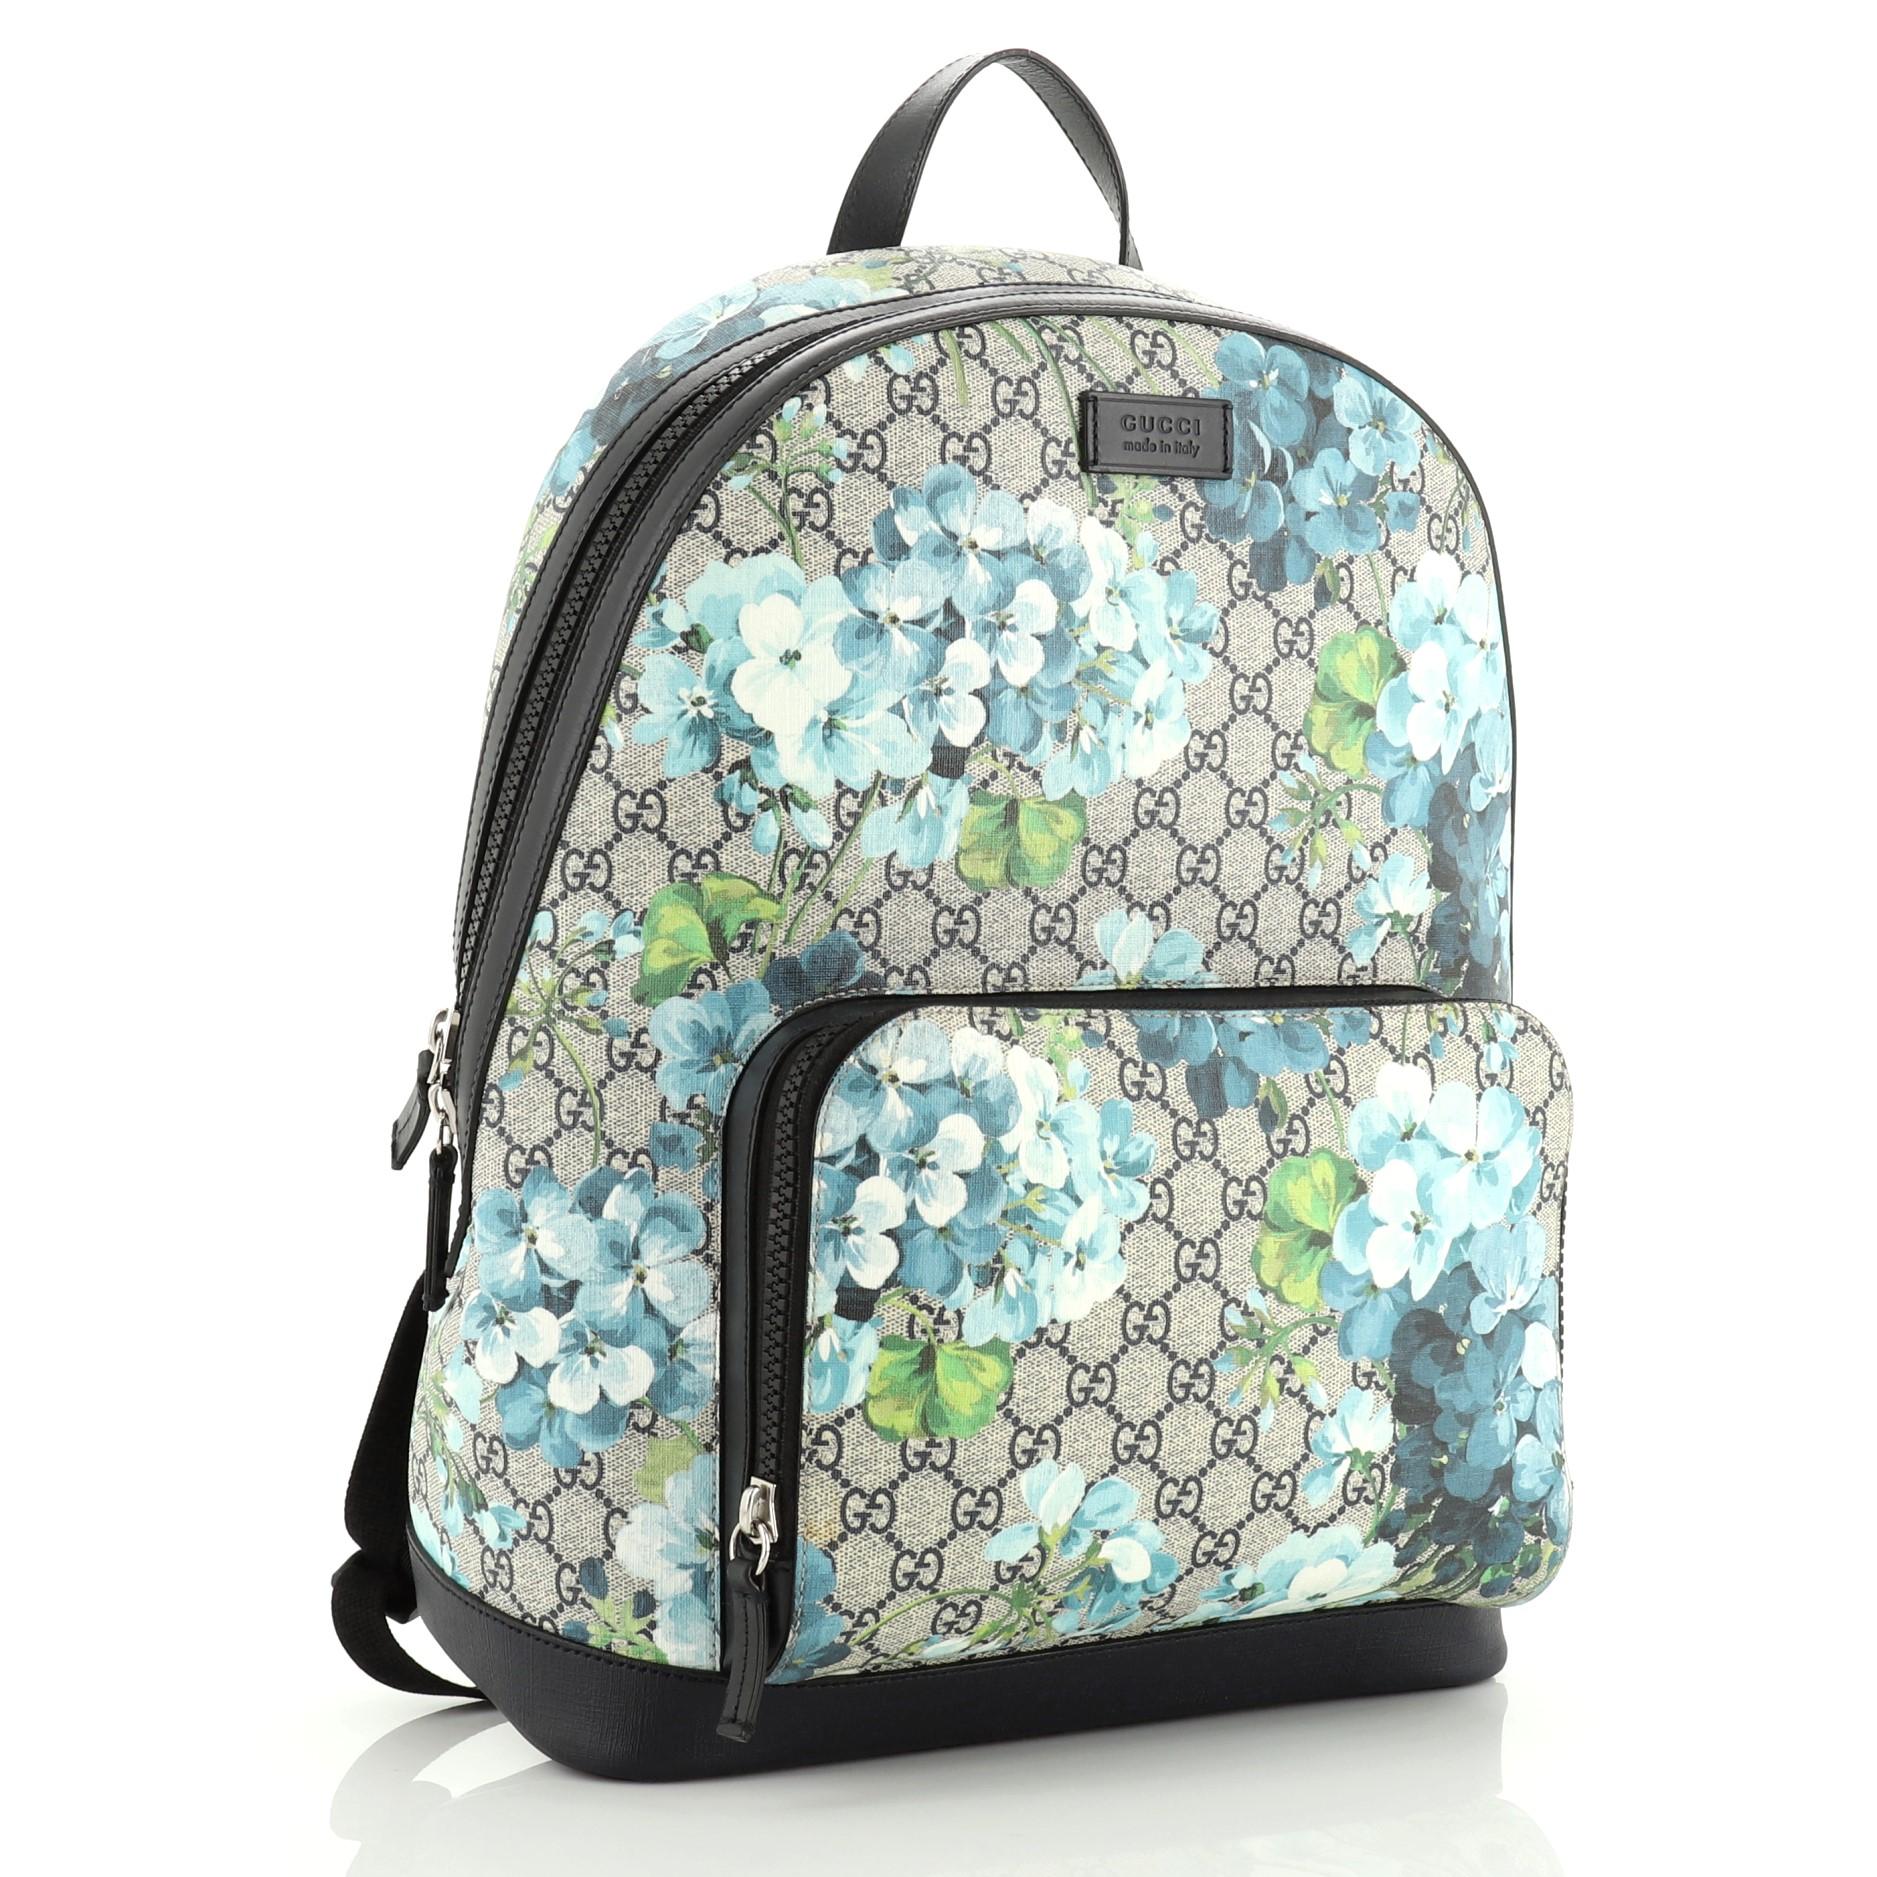 This Gucci Zip Pocket Backpack Blooms Print GG Coated Canvas Medium, crafted from blue GG coated canvas with blooms print, features adjustable padded shoulder straps, top handle, exterior front zip pocket and silver-tone hardware. Its zip closure